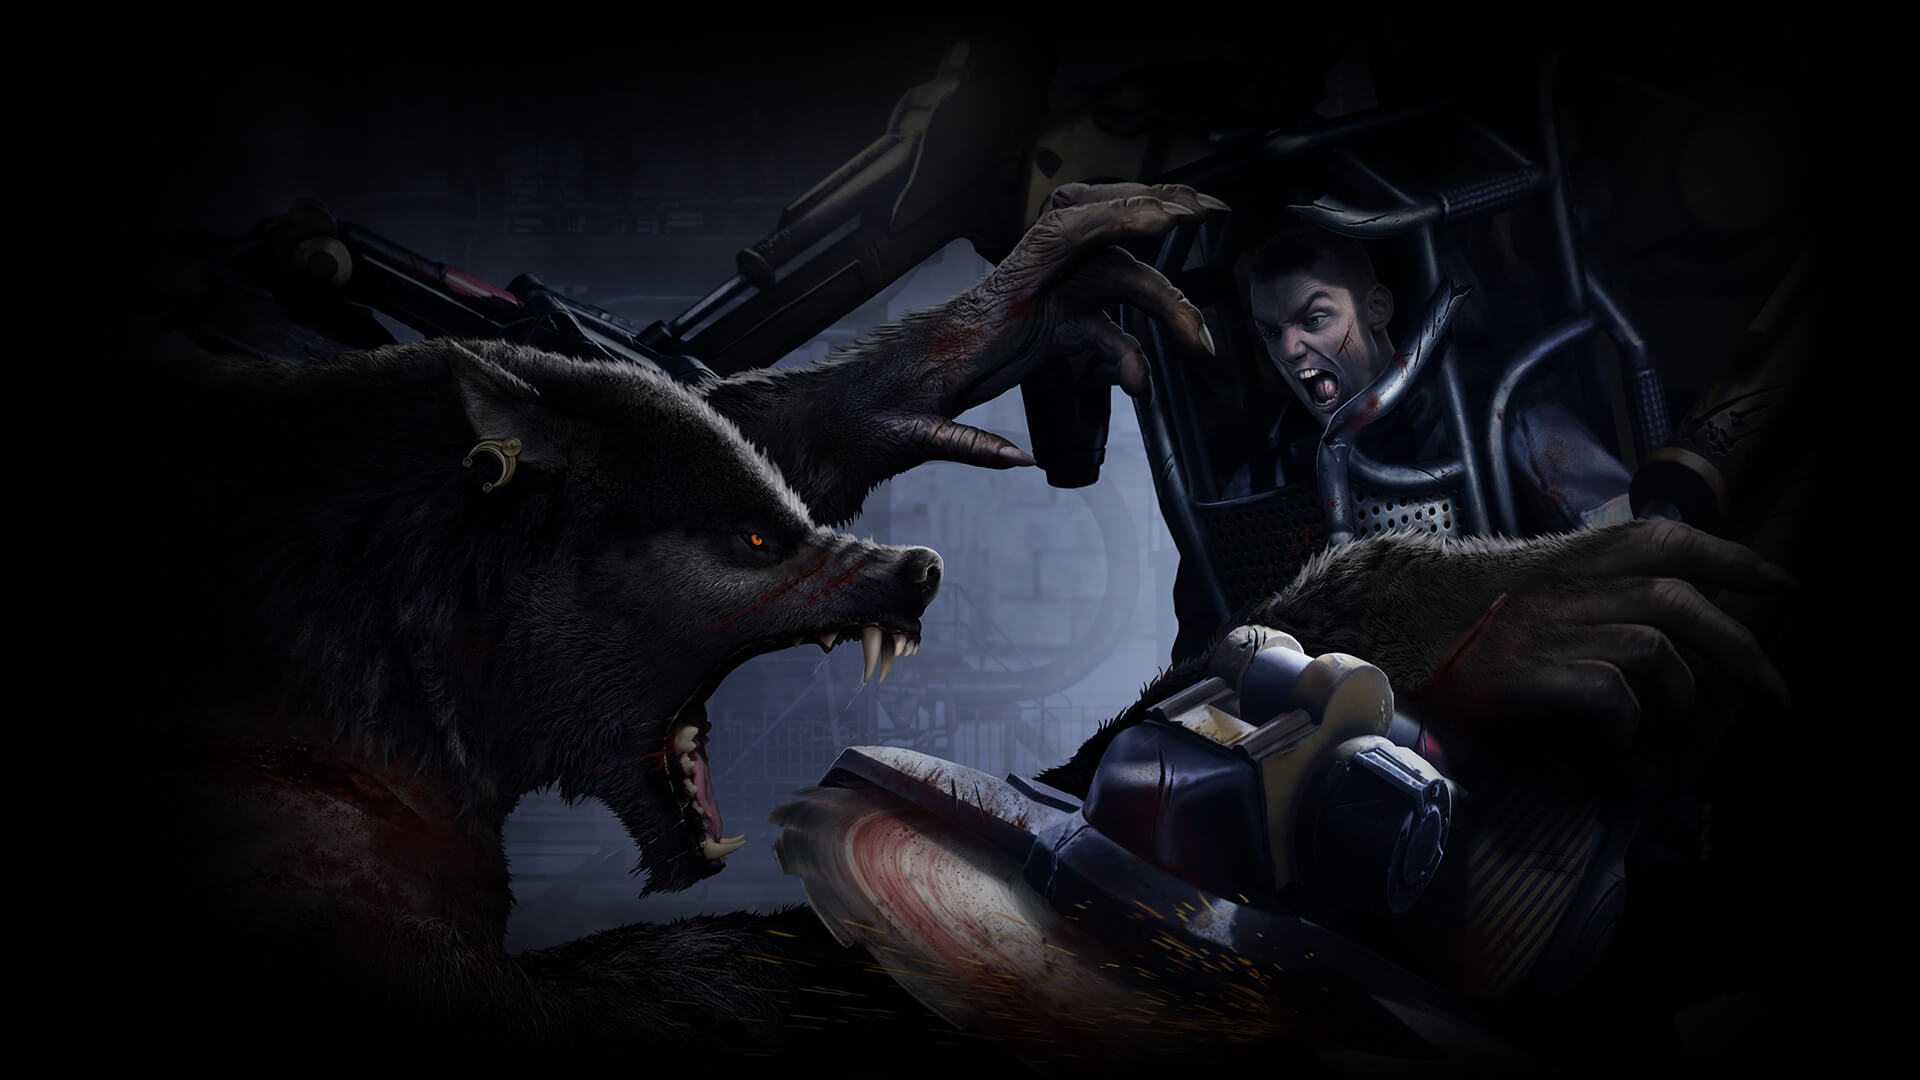 Werewolf: The Apocalypse - Earthblood Pits Wolf Against Machine In New Cinematic Trailer